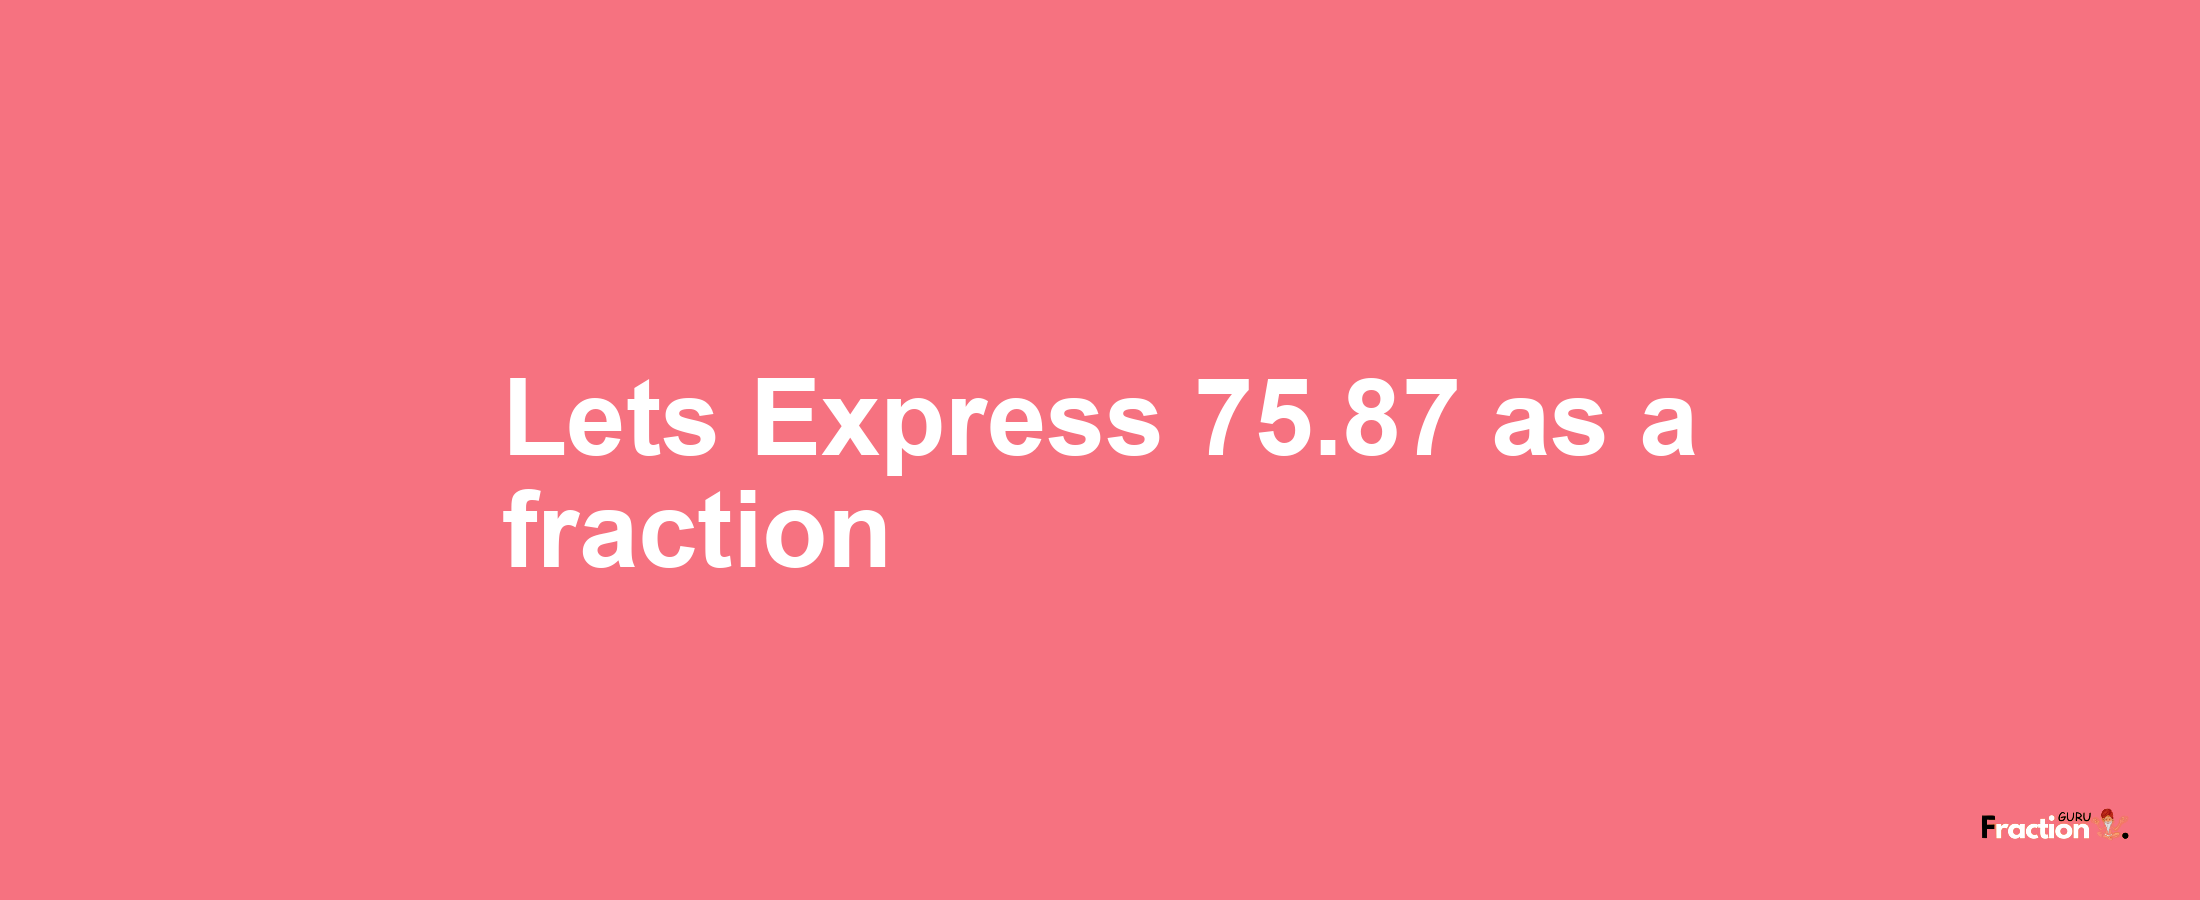 Lets Express 75.87 as afraction